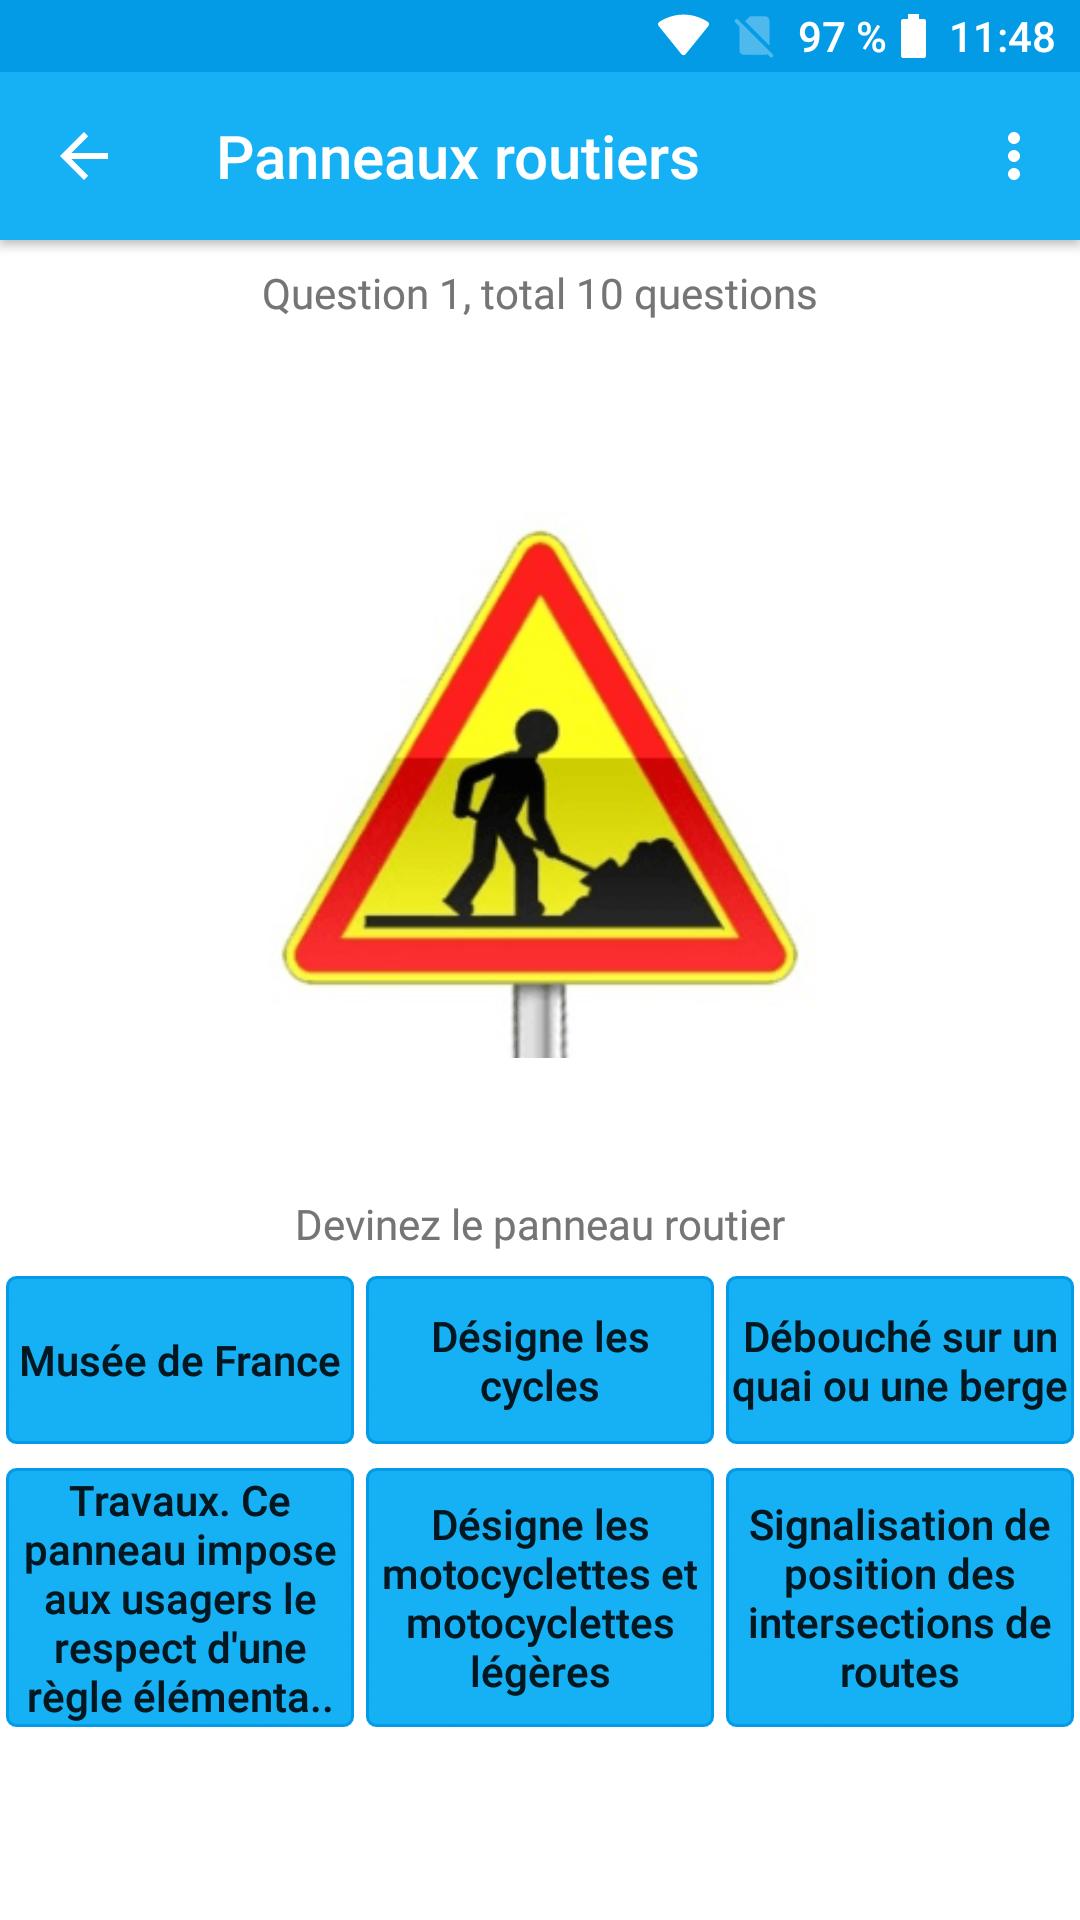 Panneaux routiers for Android - APK Download